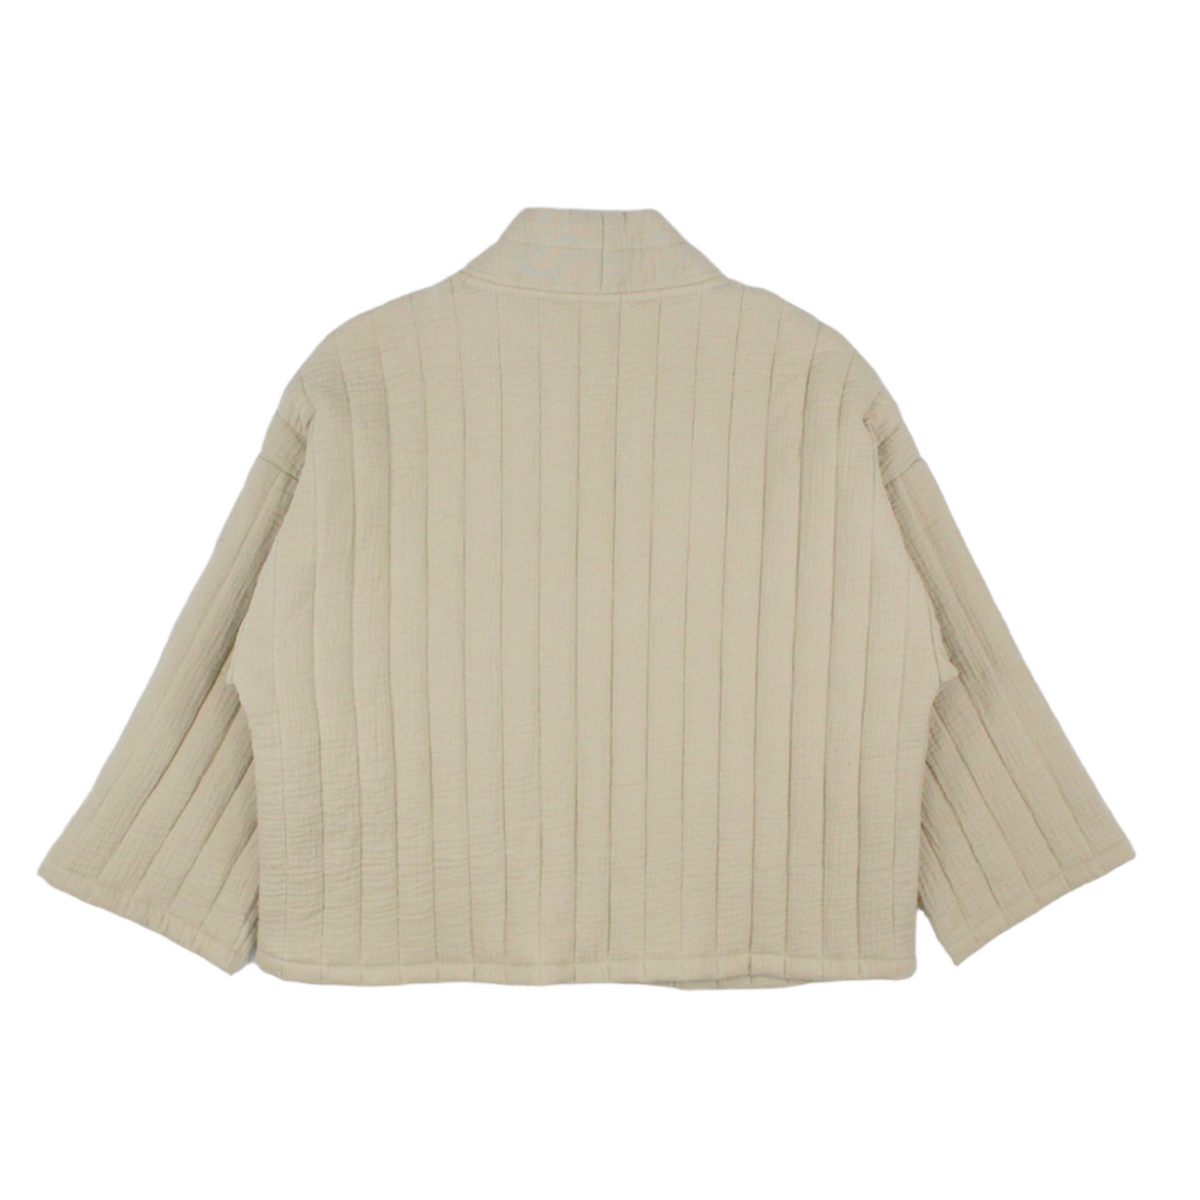 NRBY Beige Quilted Kimono Jacket - Sample